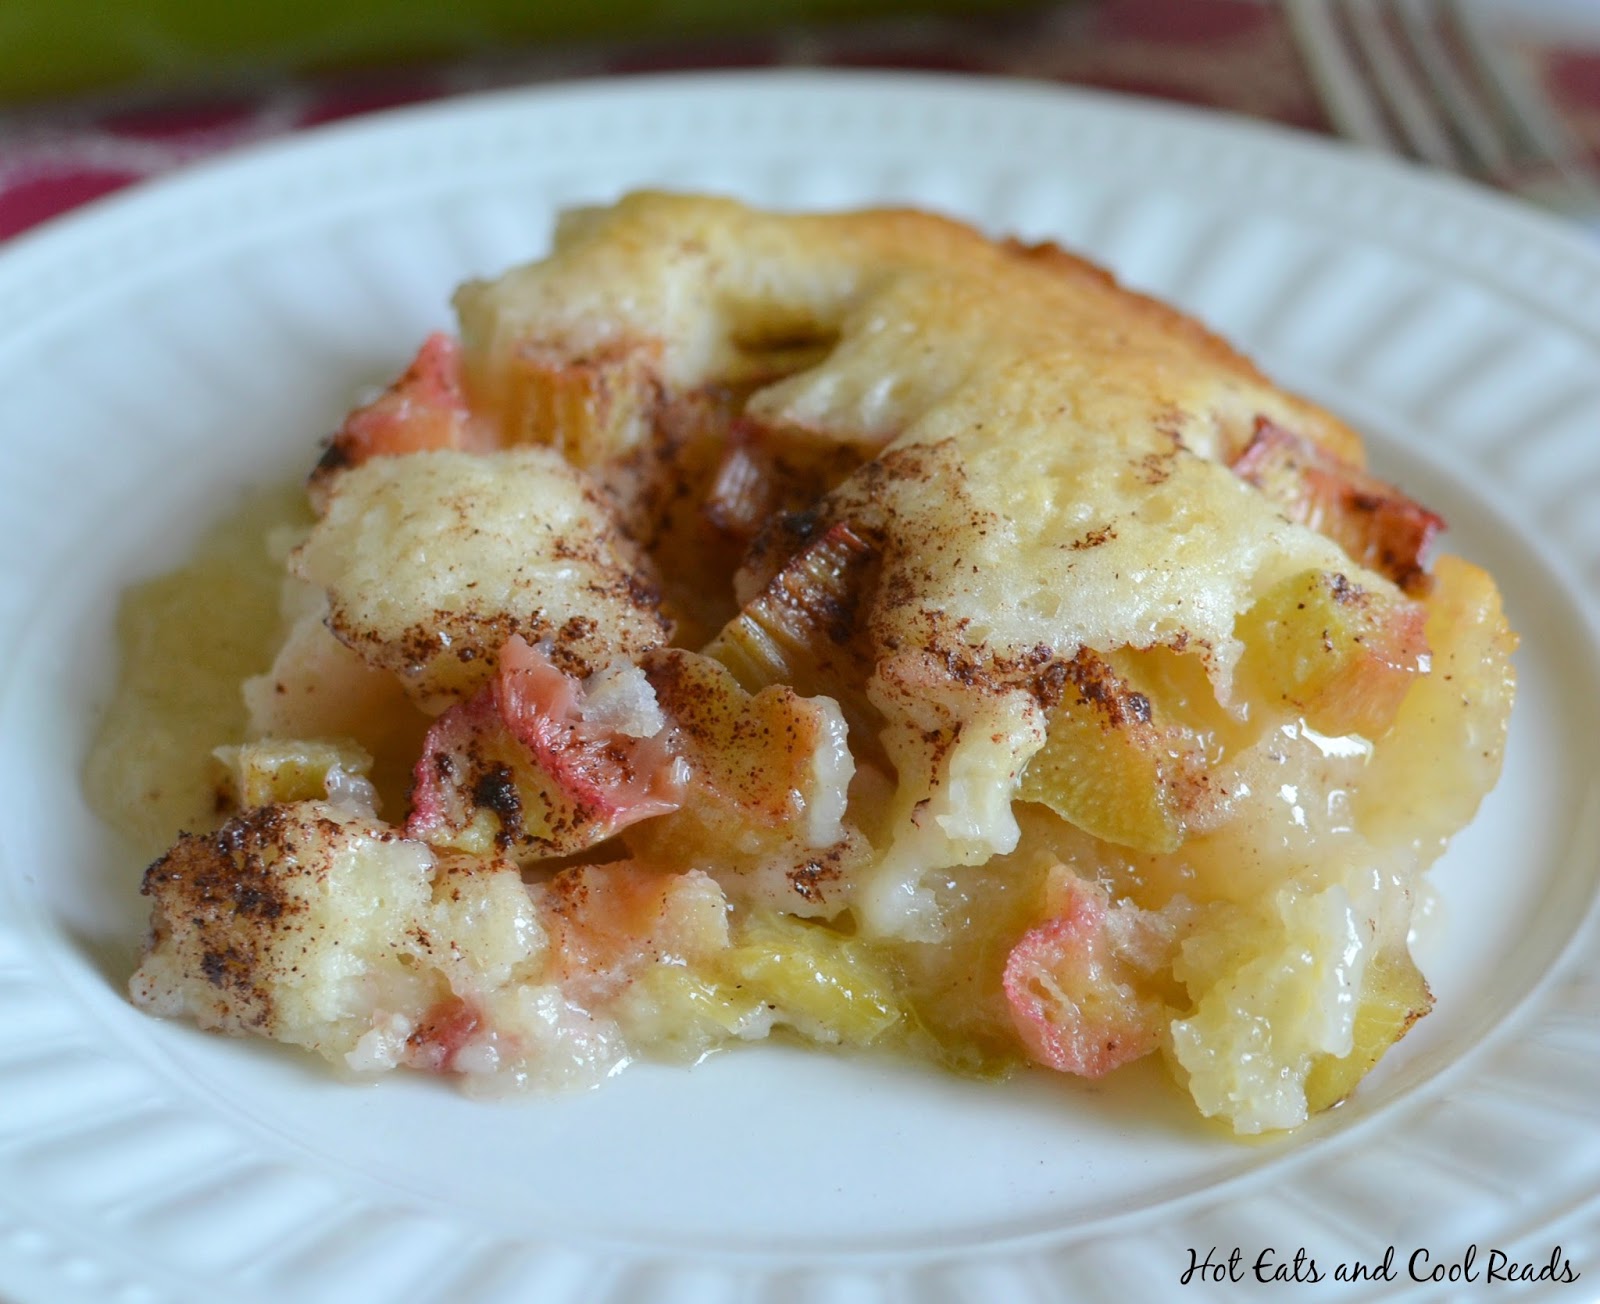 Hot Eats and Cool Reads: Amazing Rhubarb Cobbler Recipe